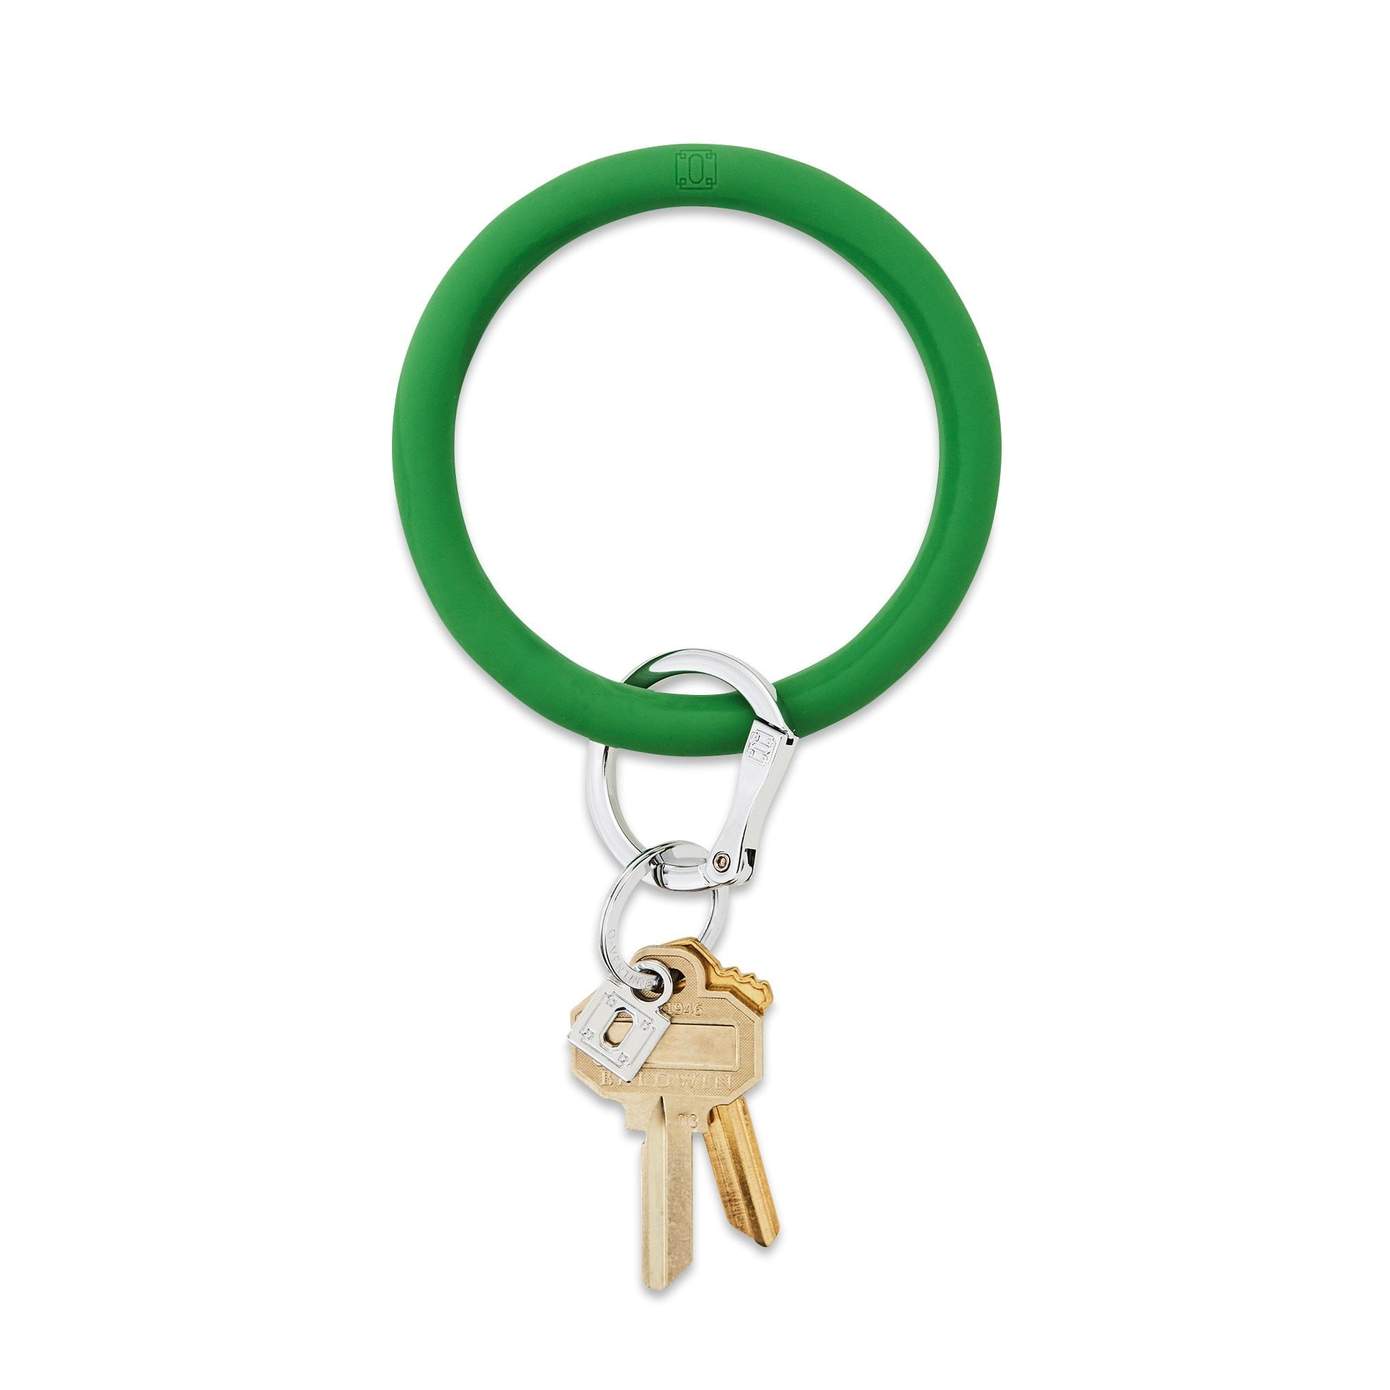 Oventure Key Ring - Provisions Mercantile